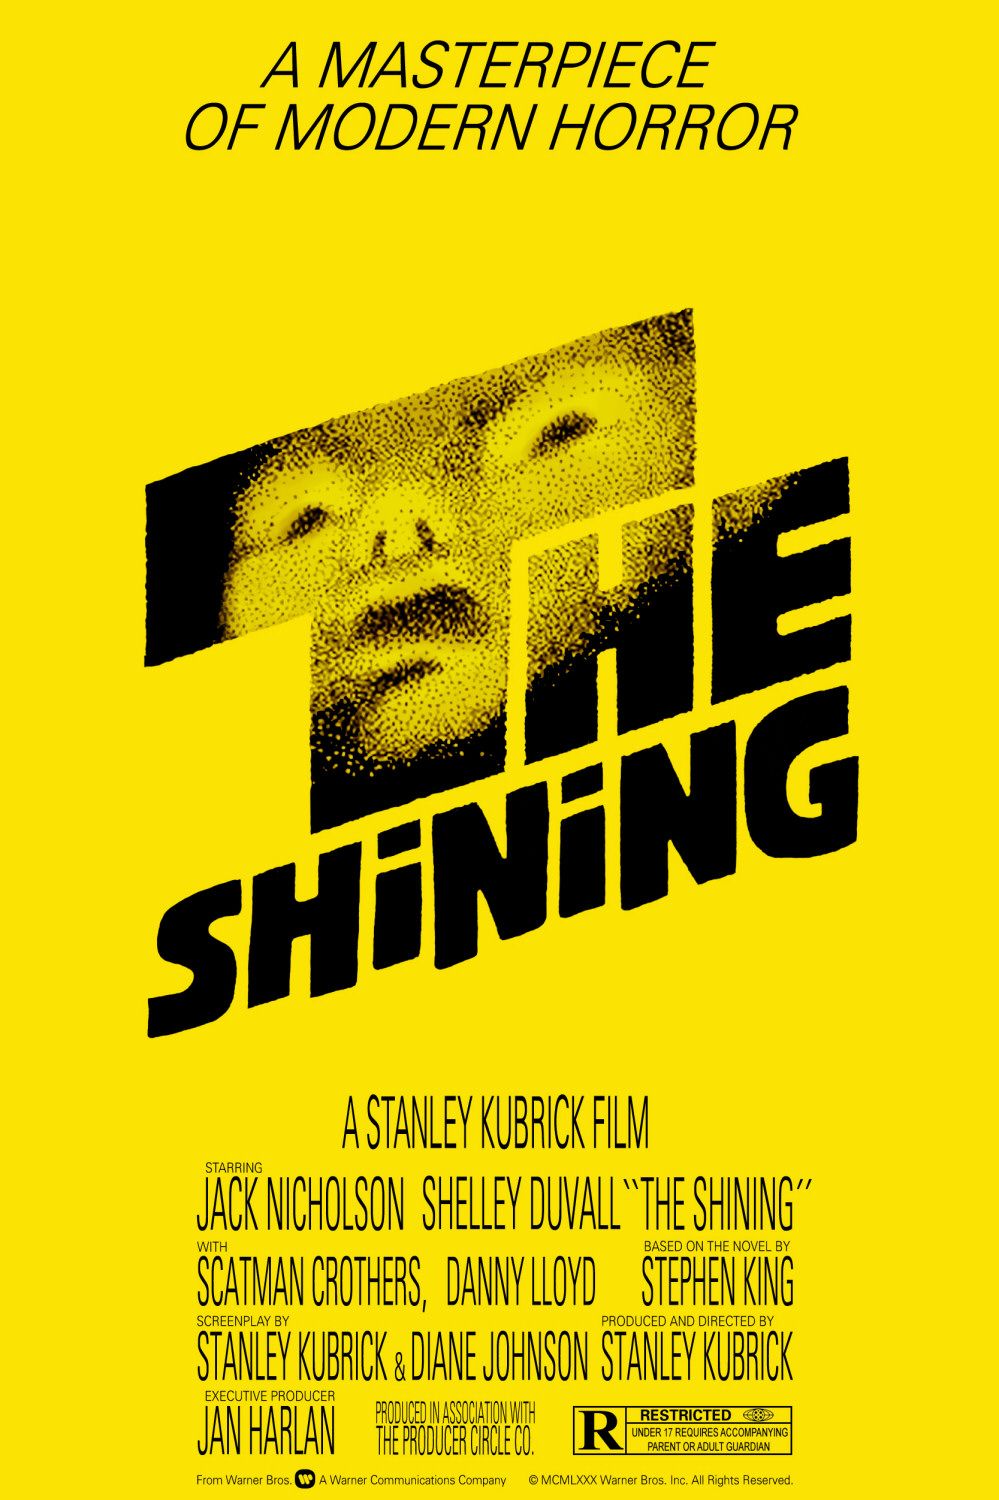 The Movie Poster (Shining)